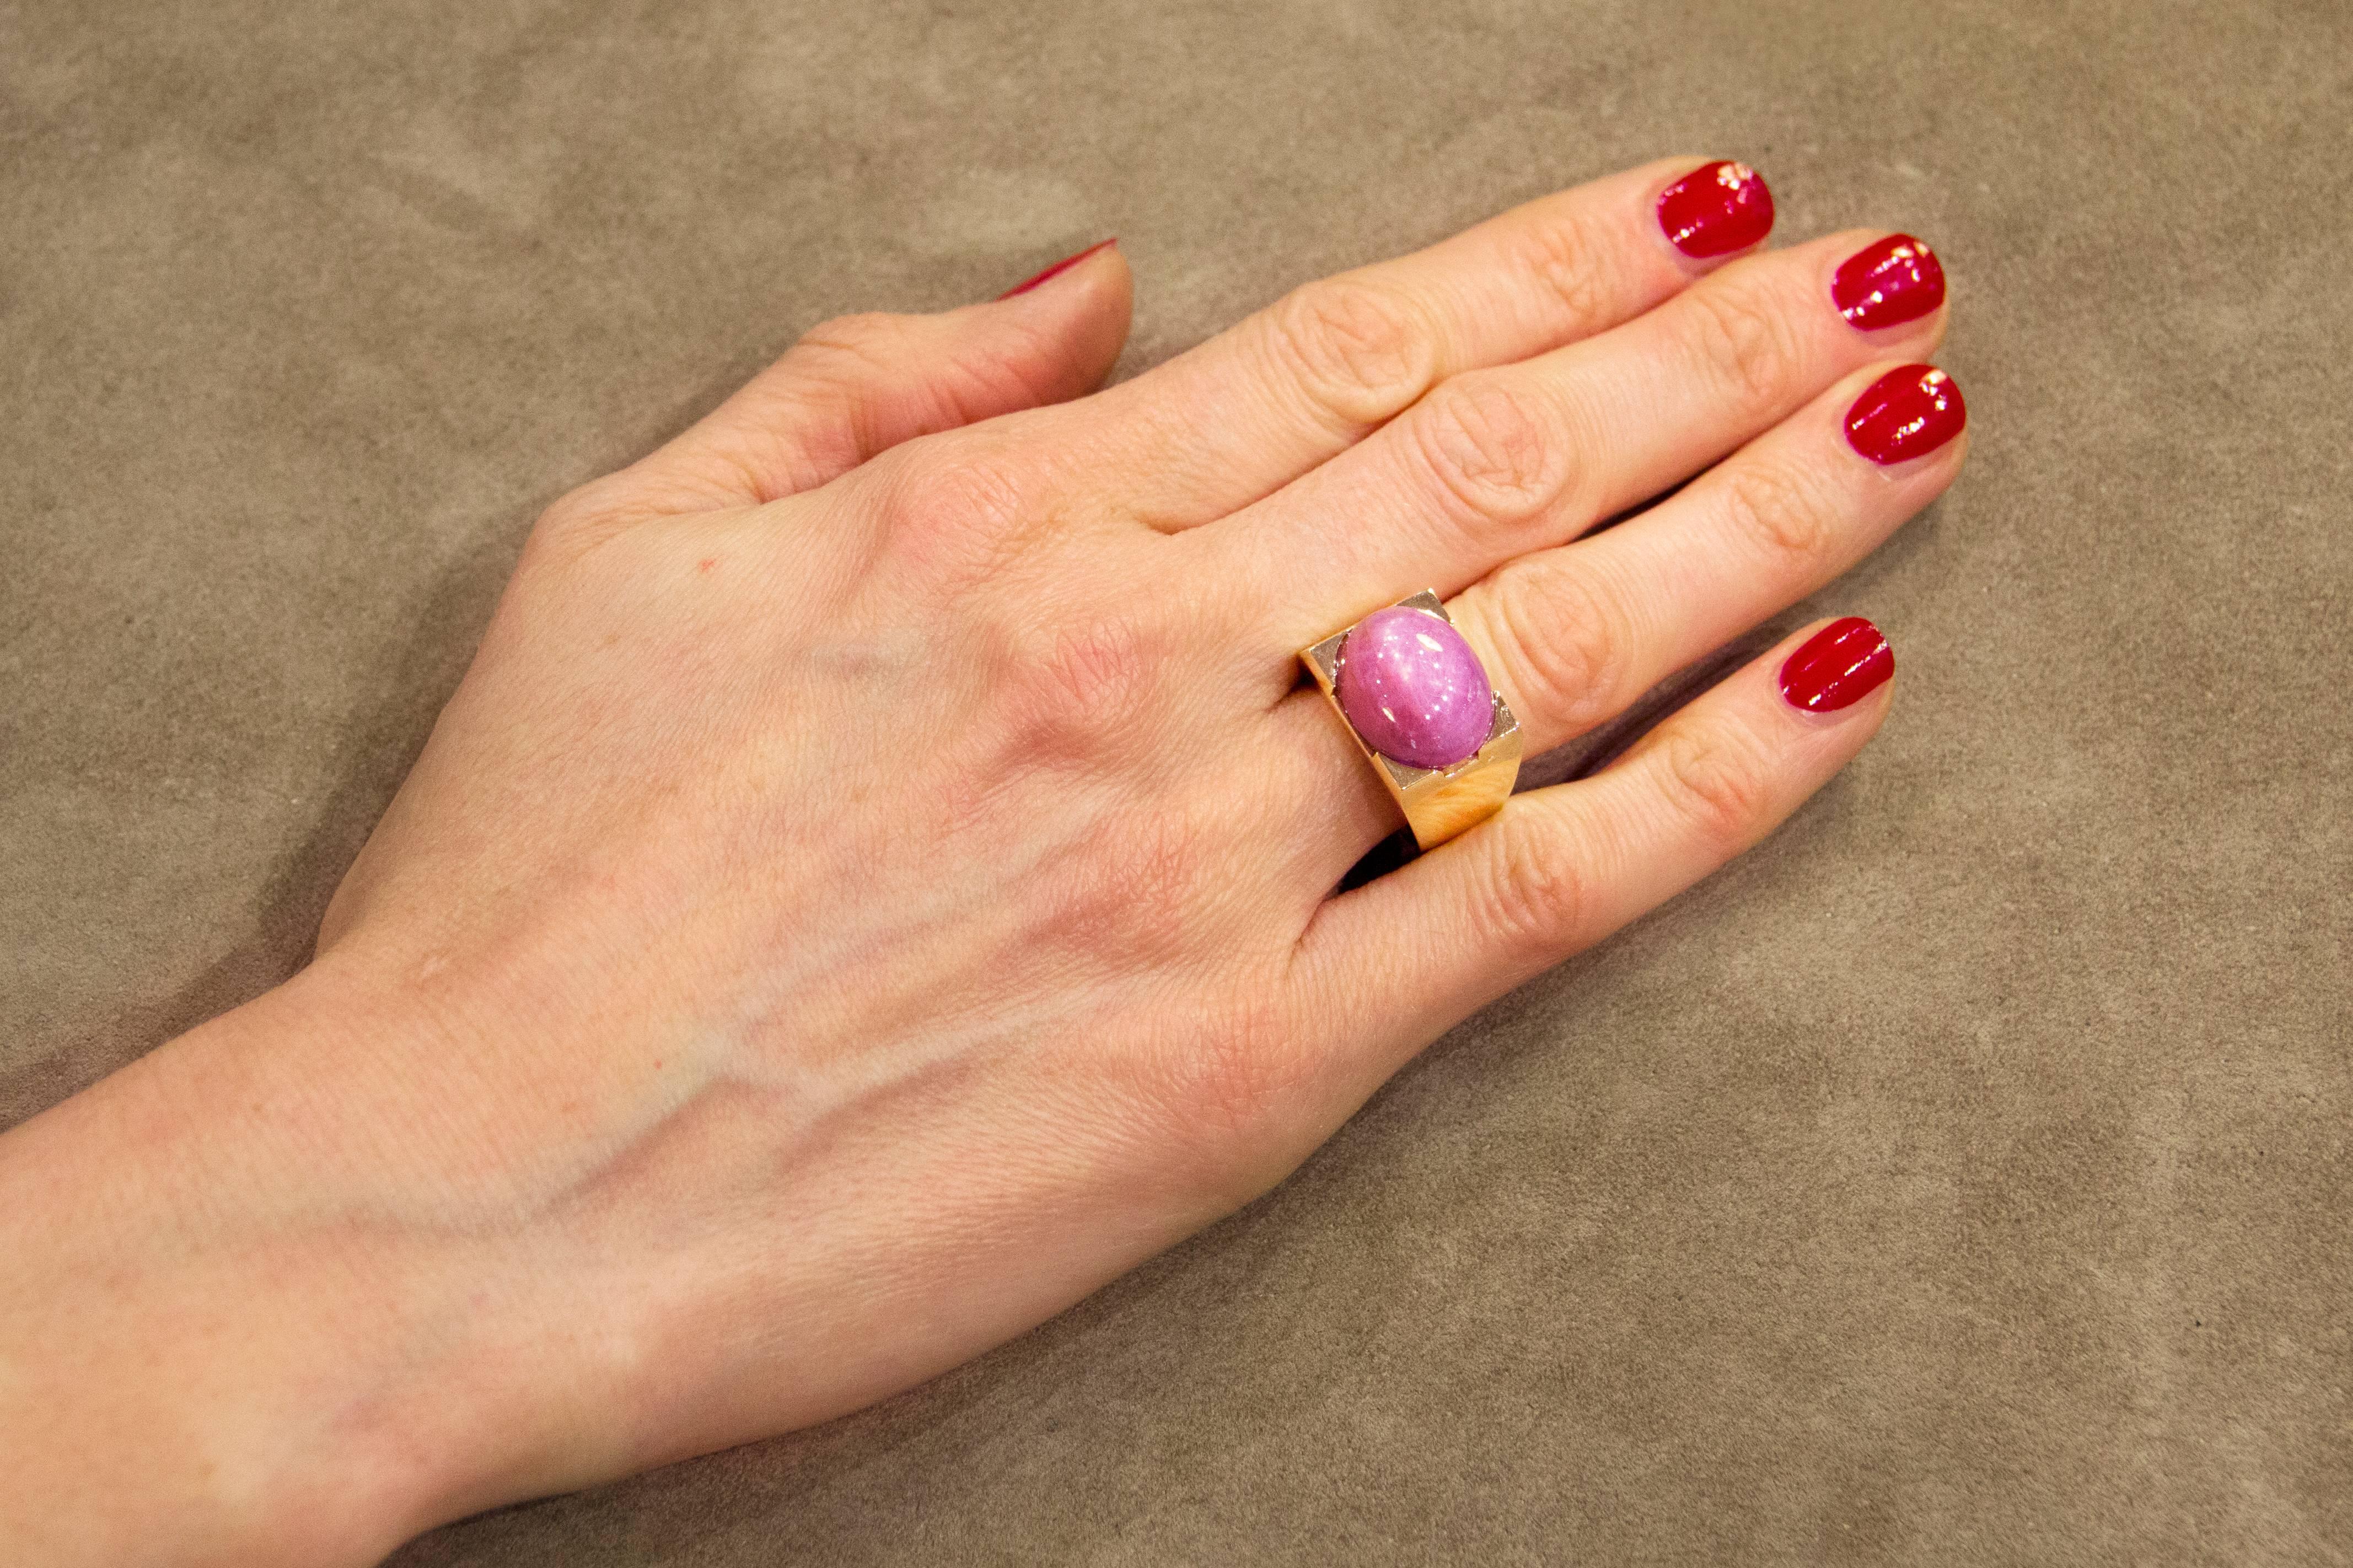 Jona design collection, hand crafted in Italy, 18 Karat rose gold ring centering a natural oval-shaped cabochon star ruby weighing 24 carats; size 7. Can be sized to any specification.
Dimensions : H 29 mm x W 22 mm x D 14 mm - H 1.14 in x W 0.86 in